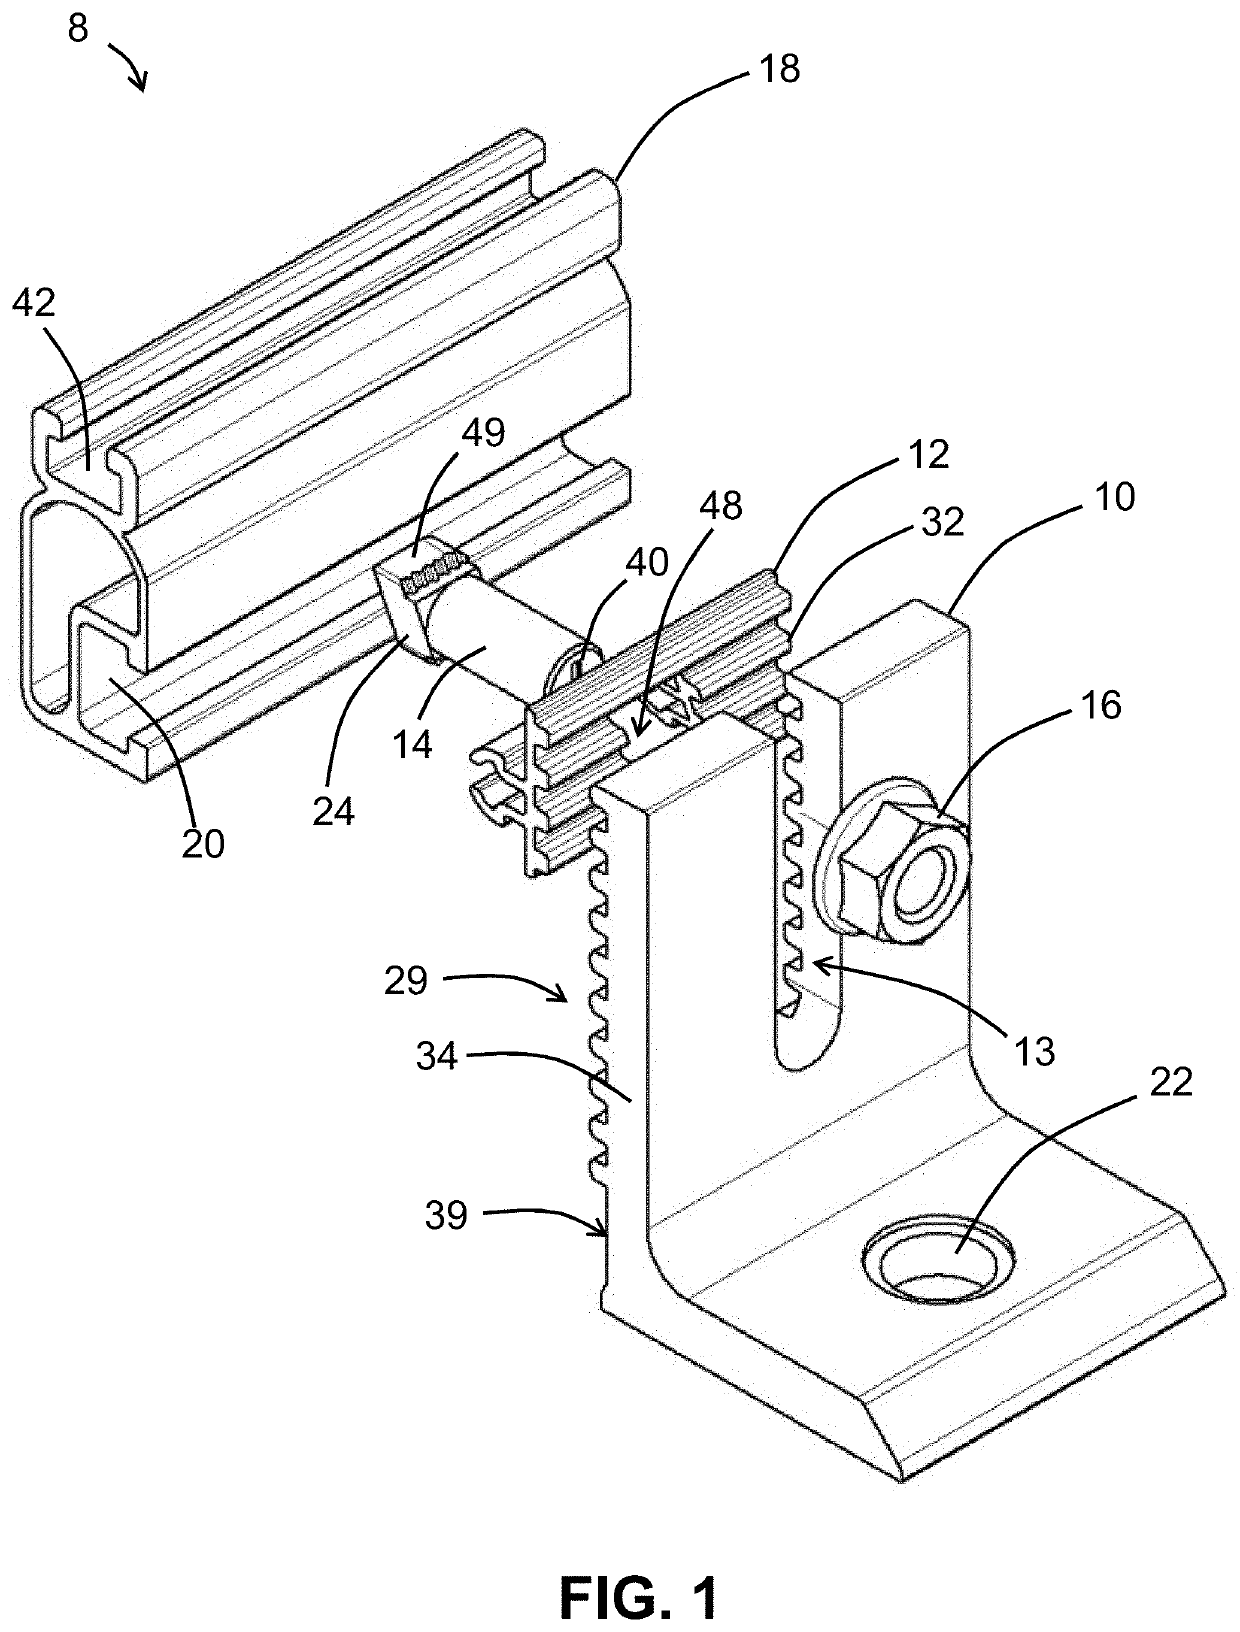 Corrugated Washer for Use with a Corrugated L-Foot Mounting Bracket for Mounting Solar Panels to a Roof